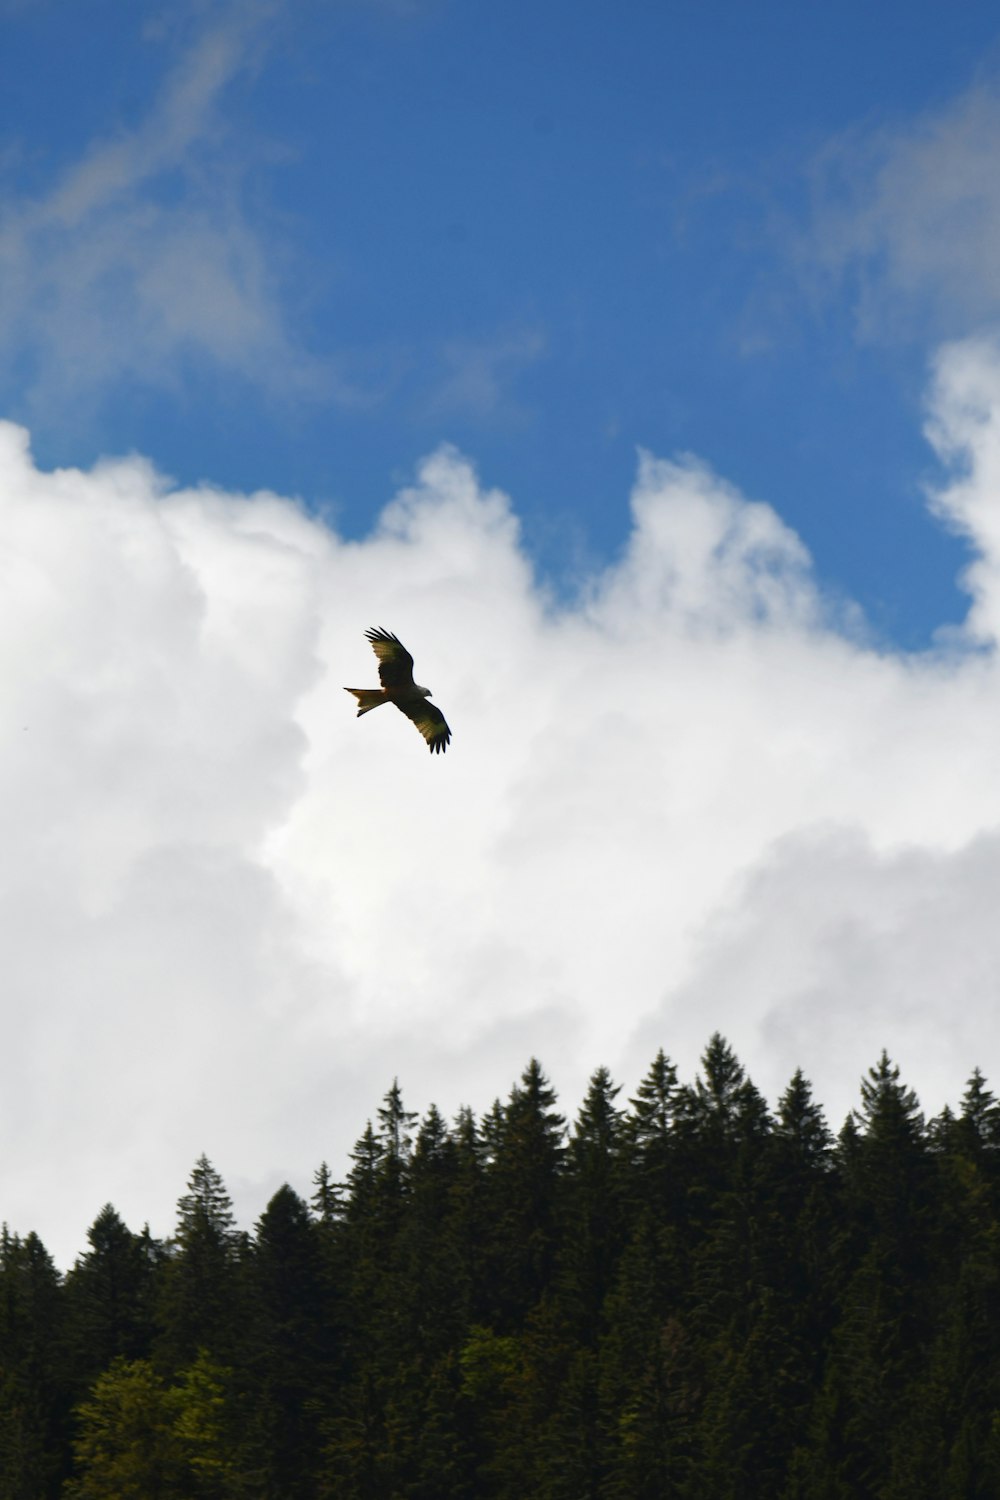 a bird flying over a forest under a cloudy sky